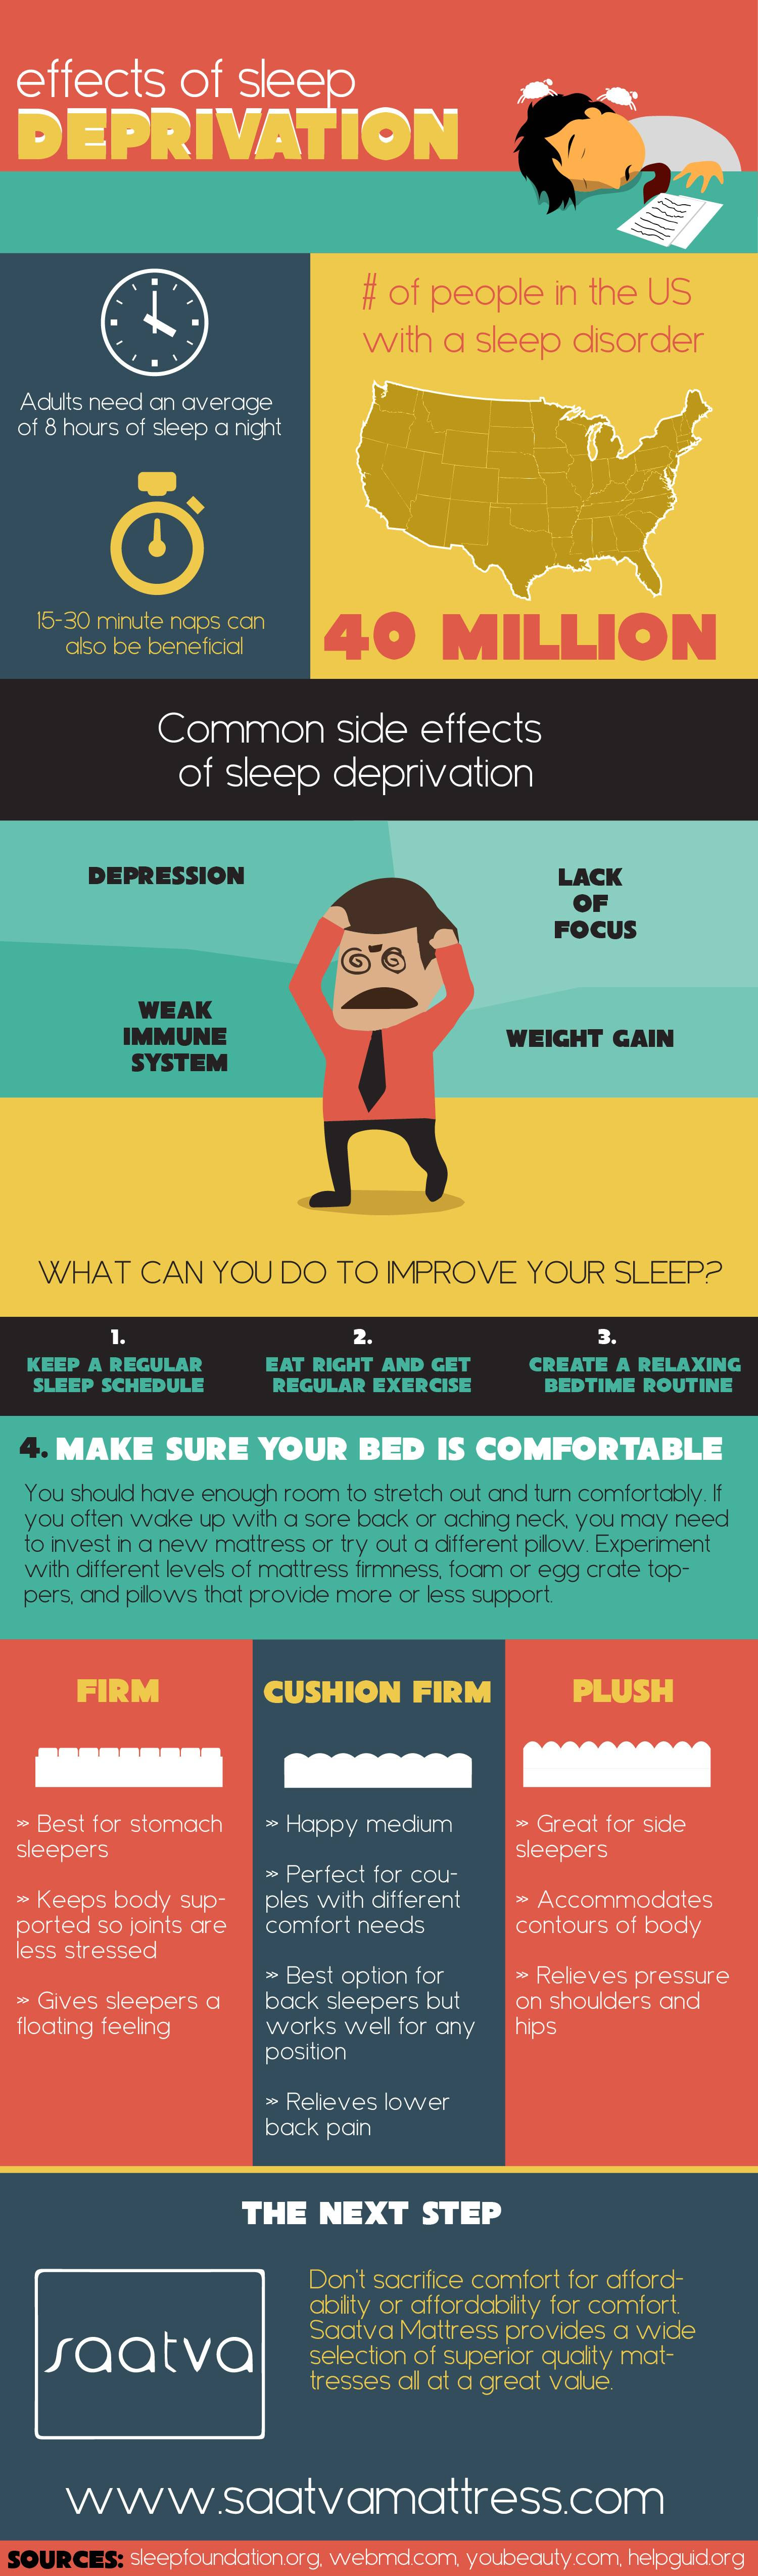 effects-of-sleep-deprivation-infographic-visualistan